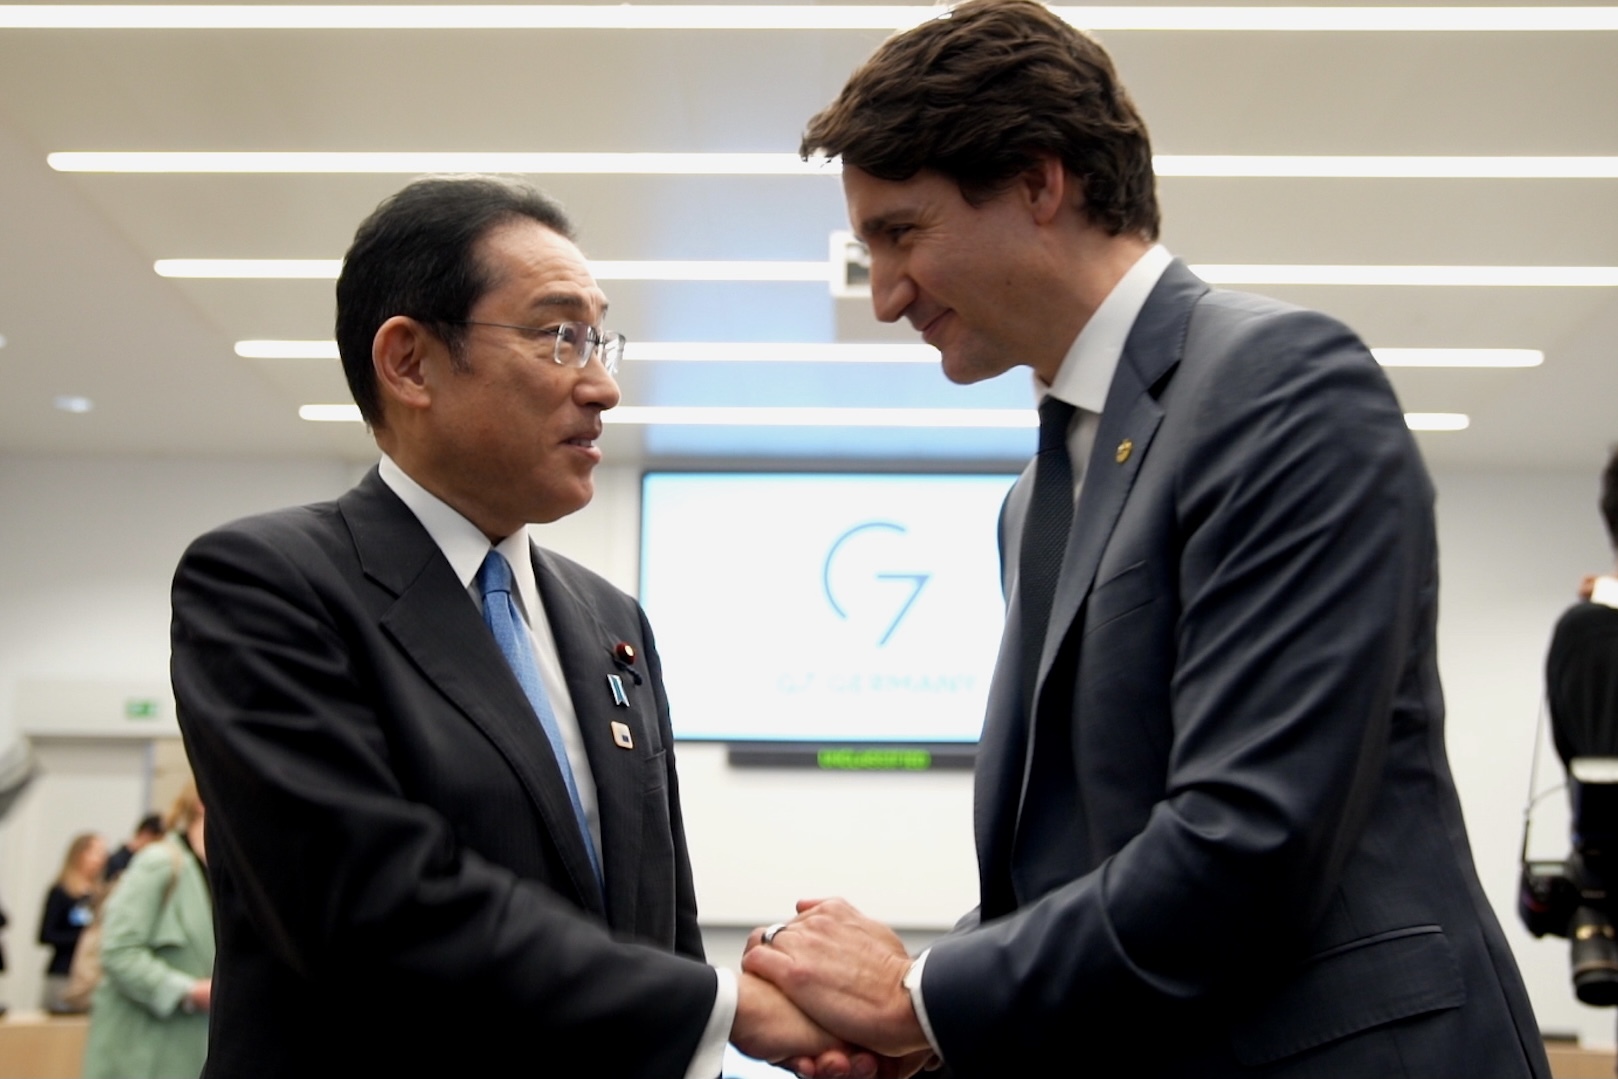 Canadian PM Justin Trudeau (R) spoke with his Japanese counterpart Fumio Kishida on Tuesday to express his “shock and deep sadness” over the assassination of former Japanese PM Shinzo Abe.